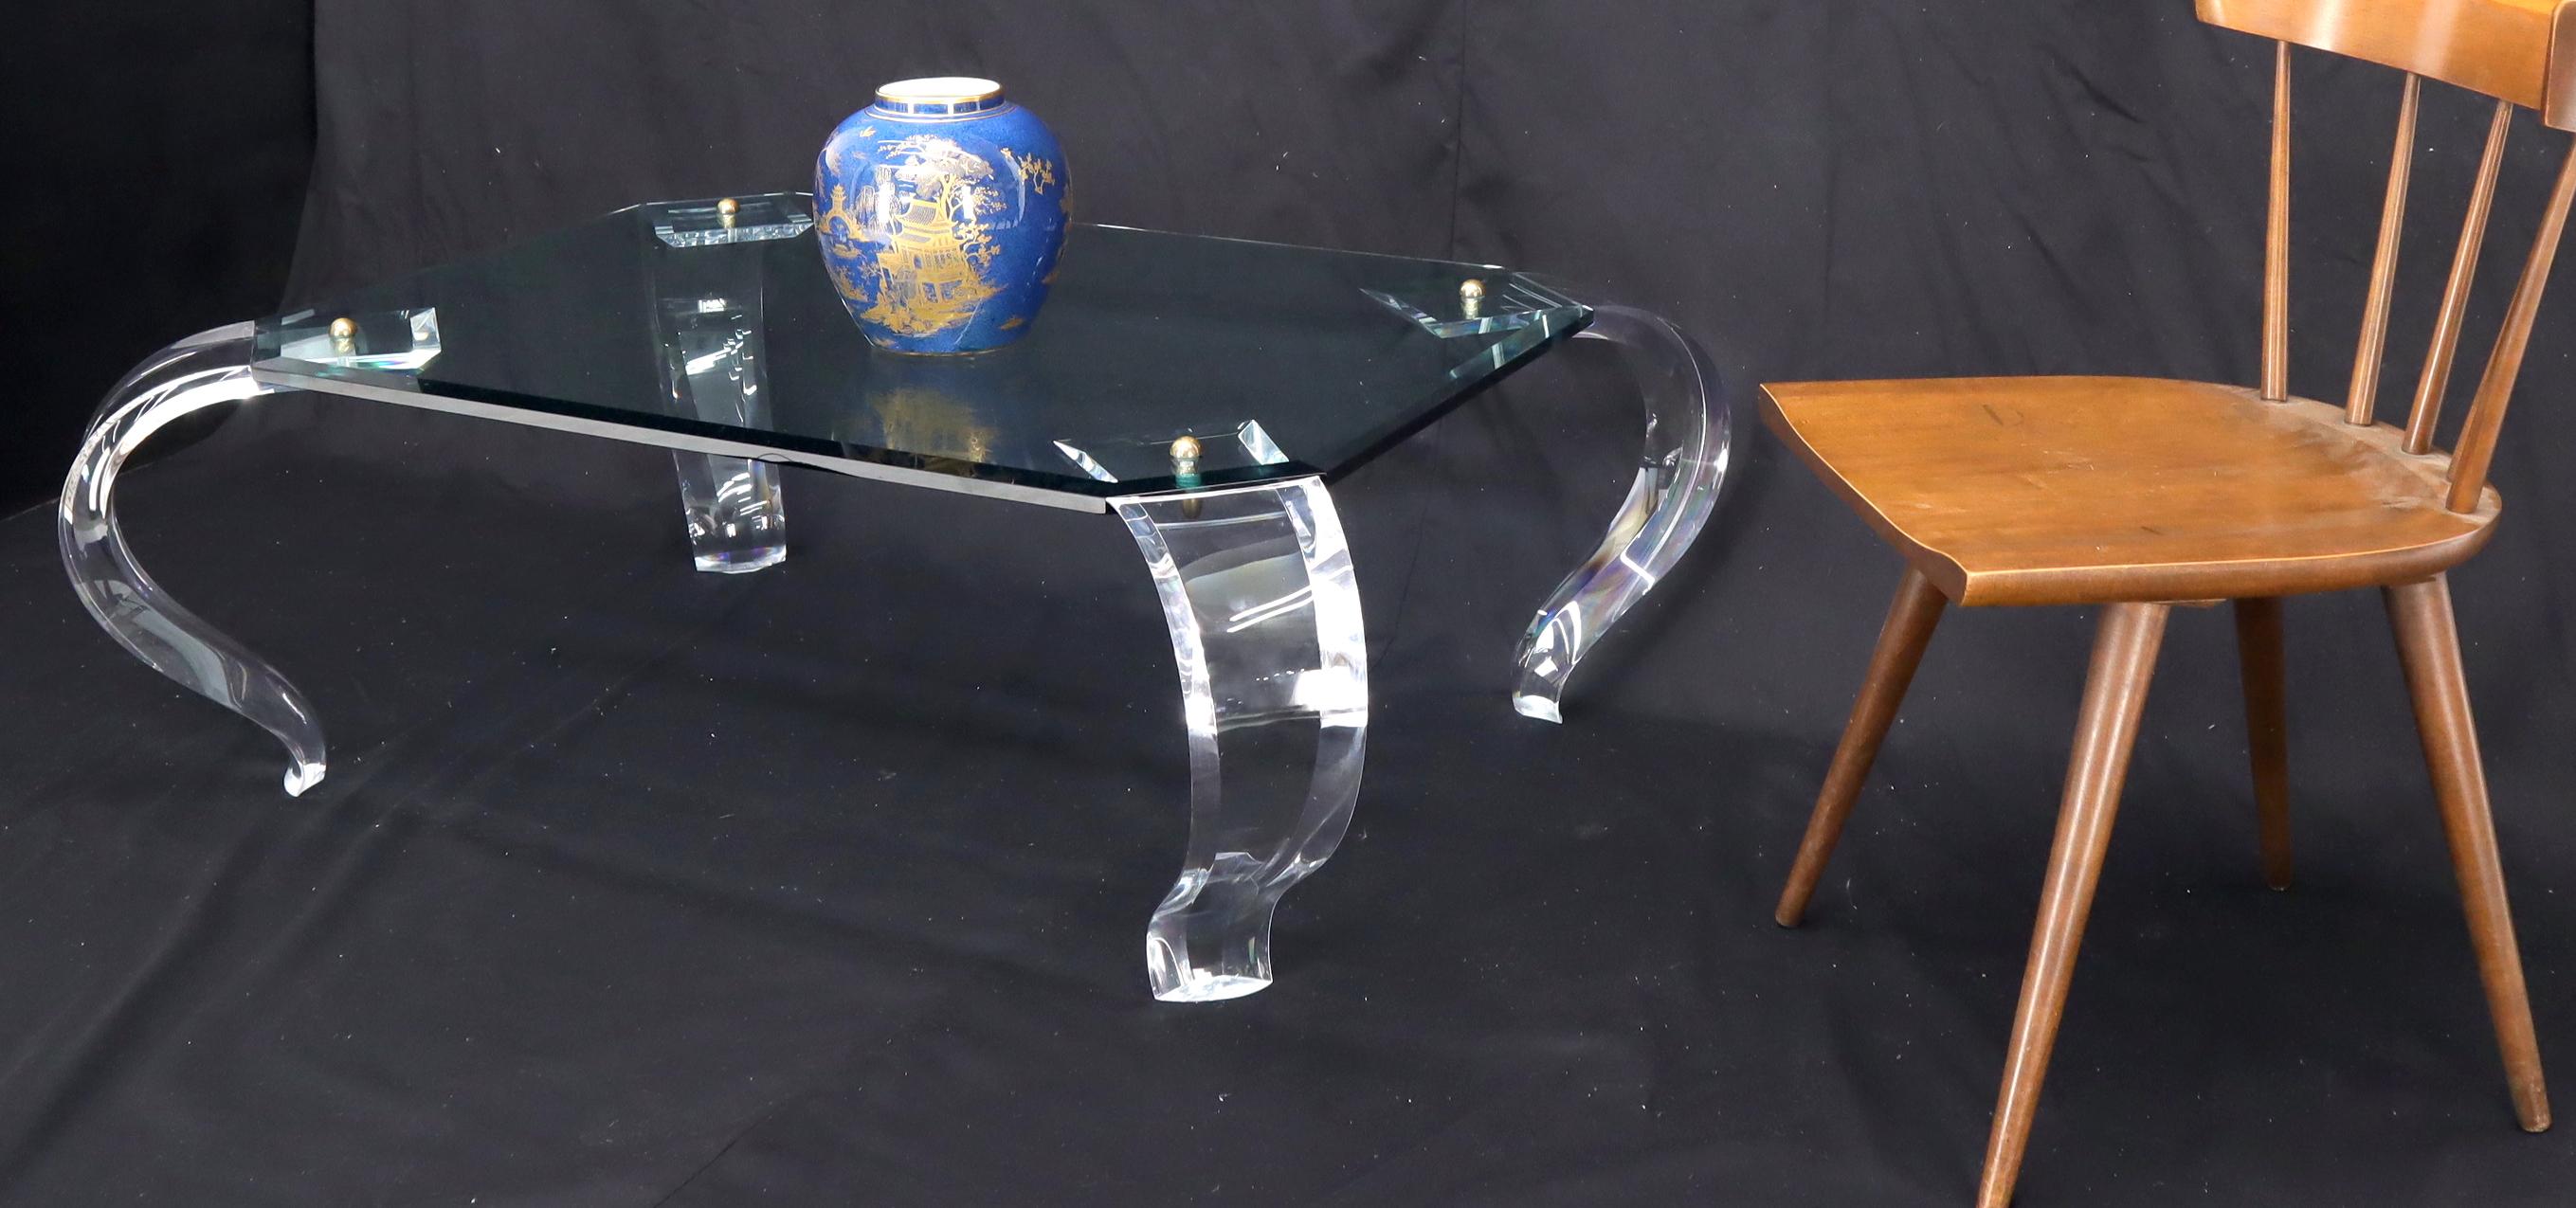 Mid-Century Modern glass top carved Lucite cabriole leg rectangular coffee table.
The legs are secured and brass ball finial decorative fastener and the whole table easily comes apart.
     